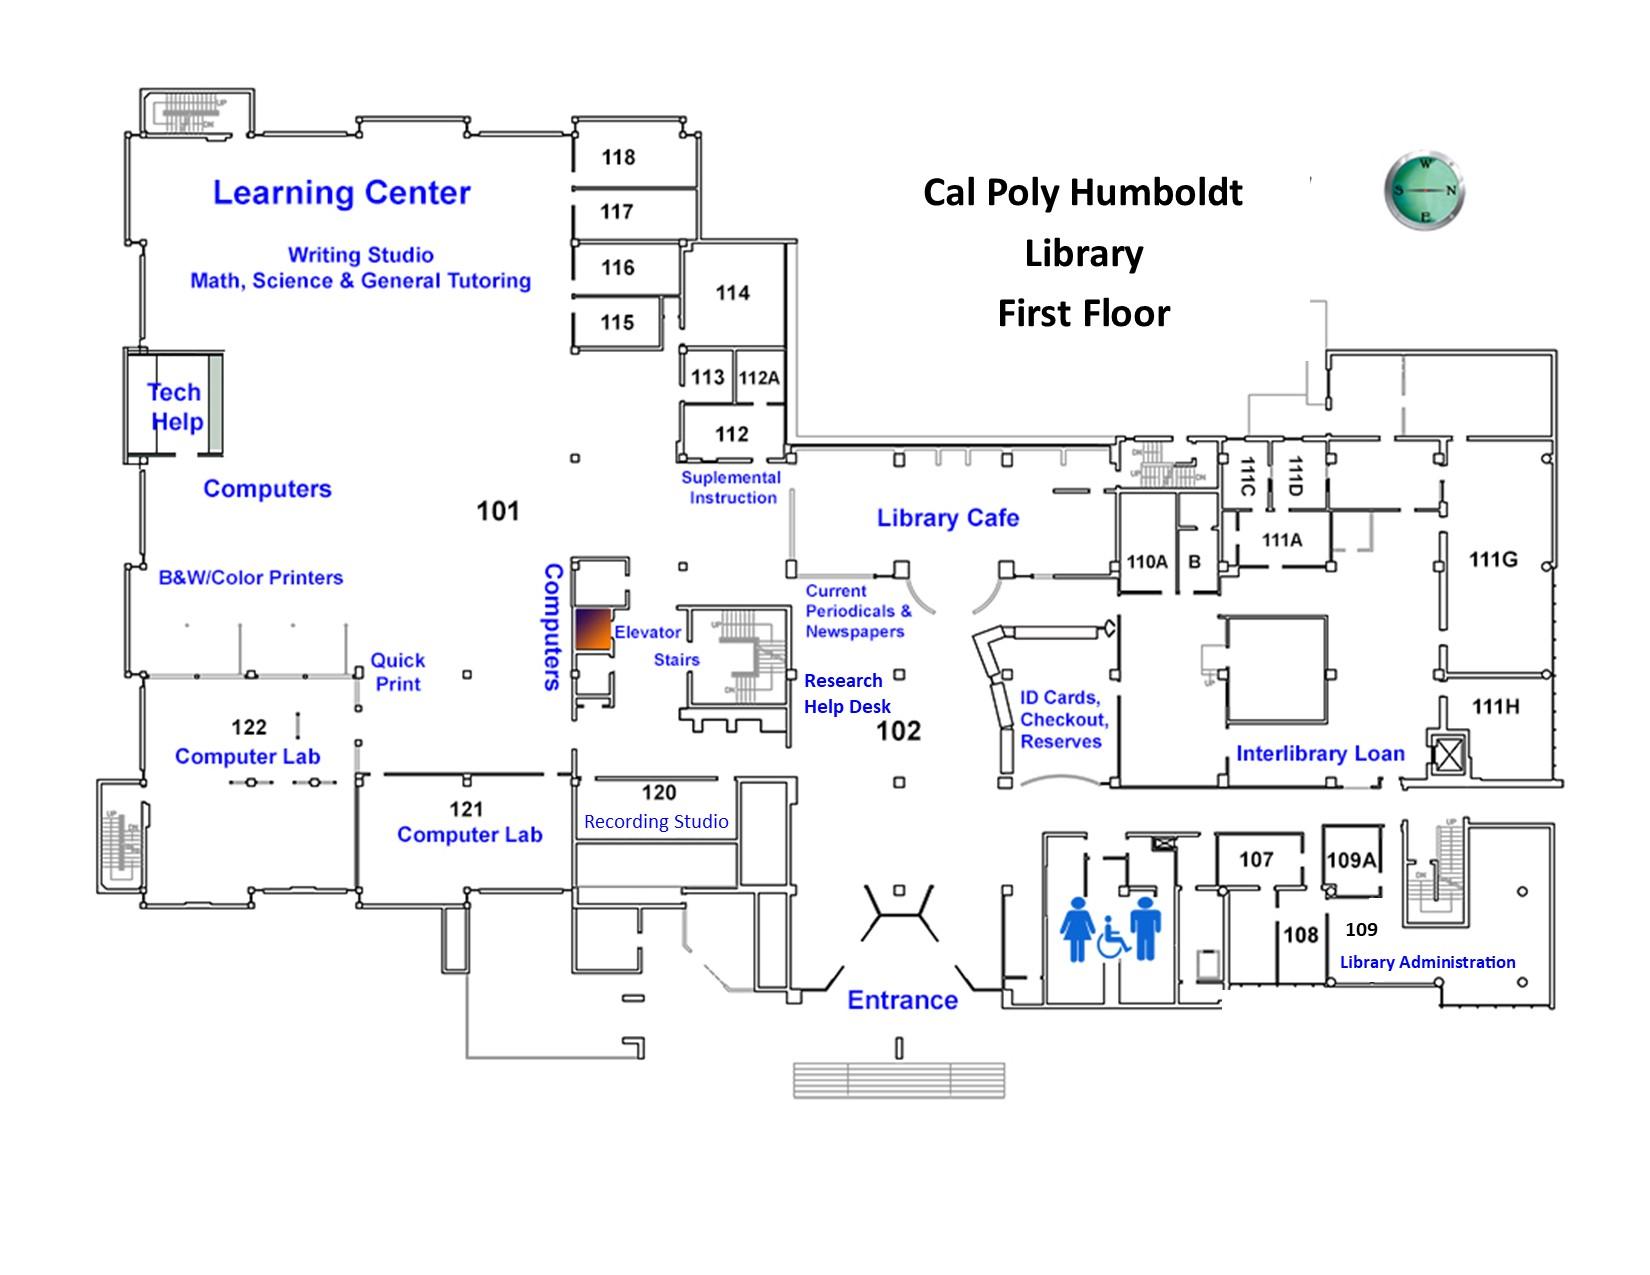 First floor map of the Library